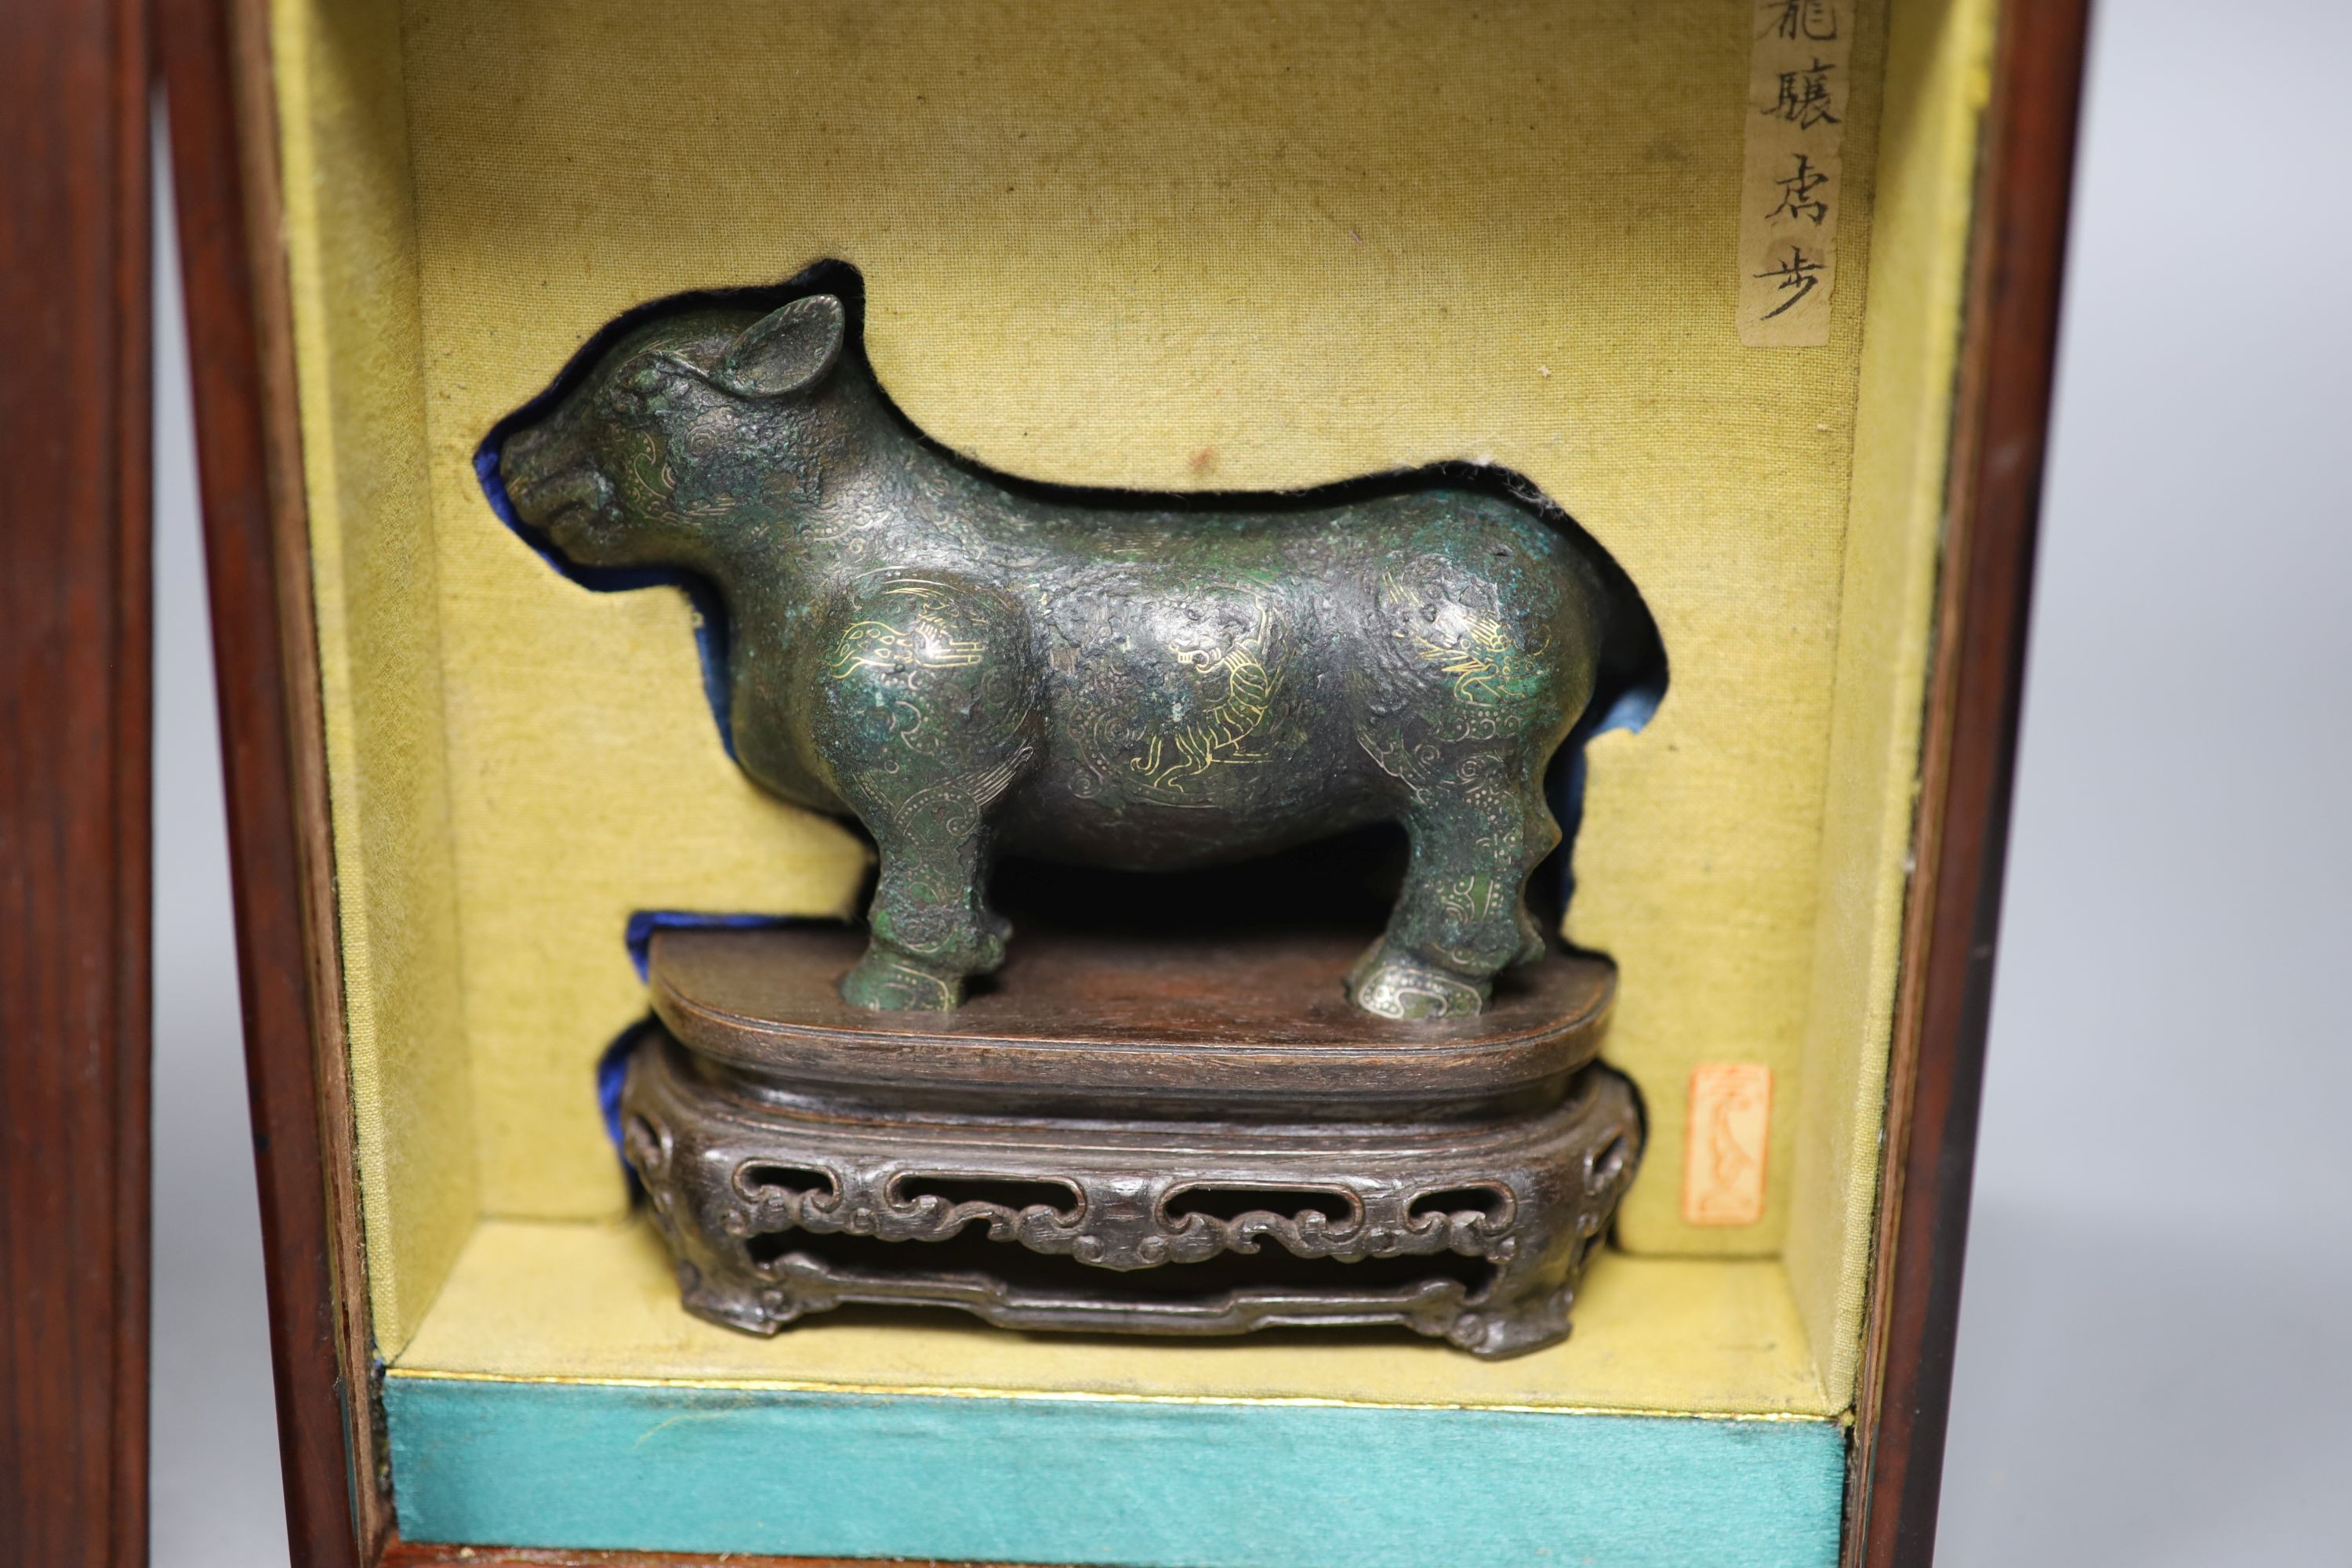 A Chinese gold and silver inlaid bronze figure of a tapir, Han dynasty or later, L. 12cm, - Image 3 of 4